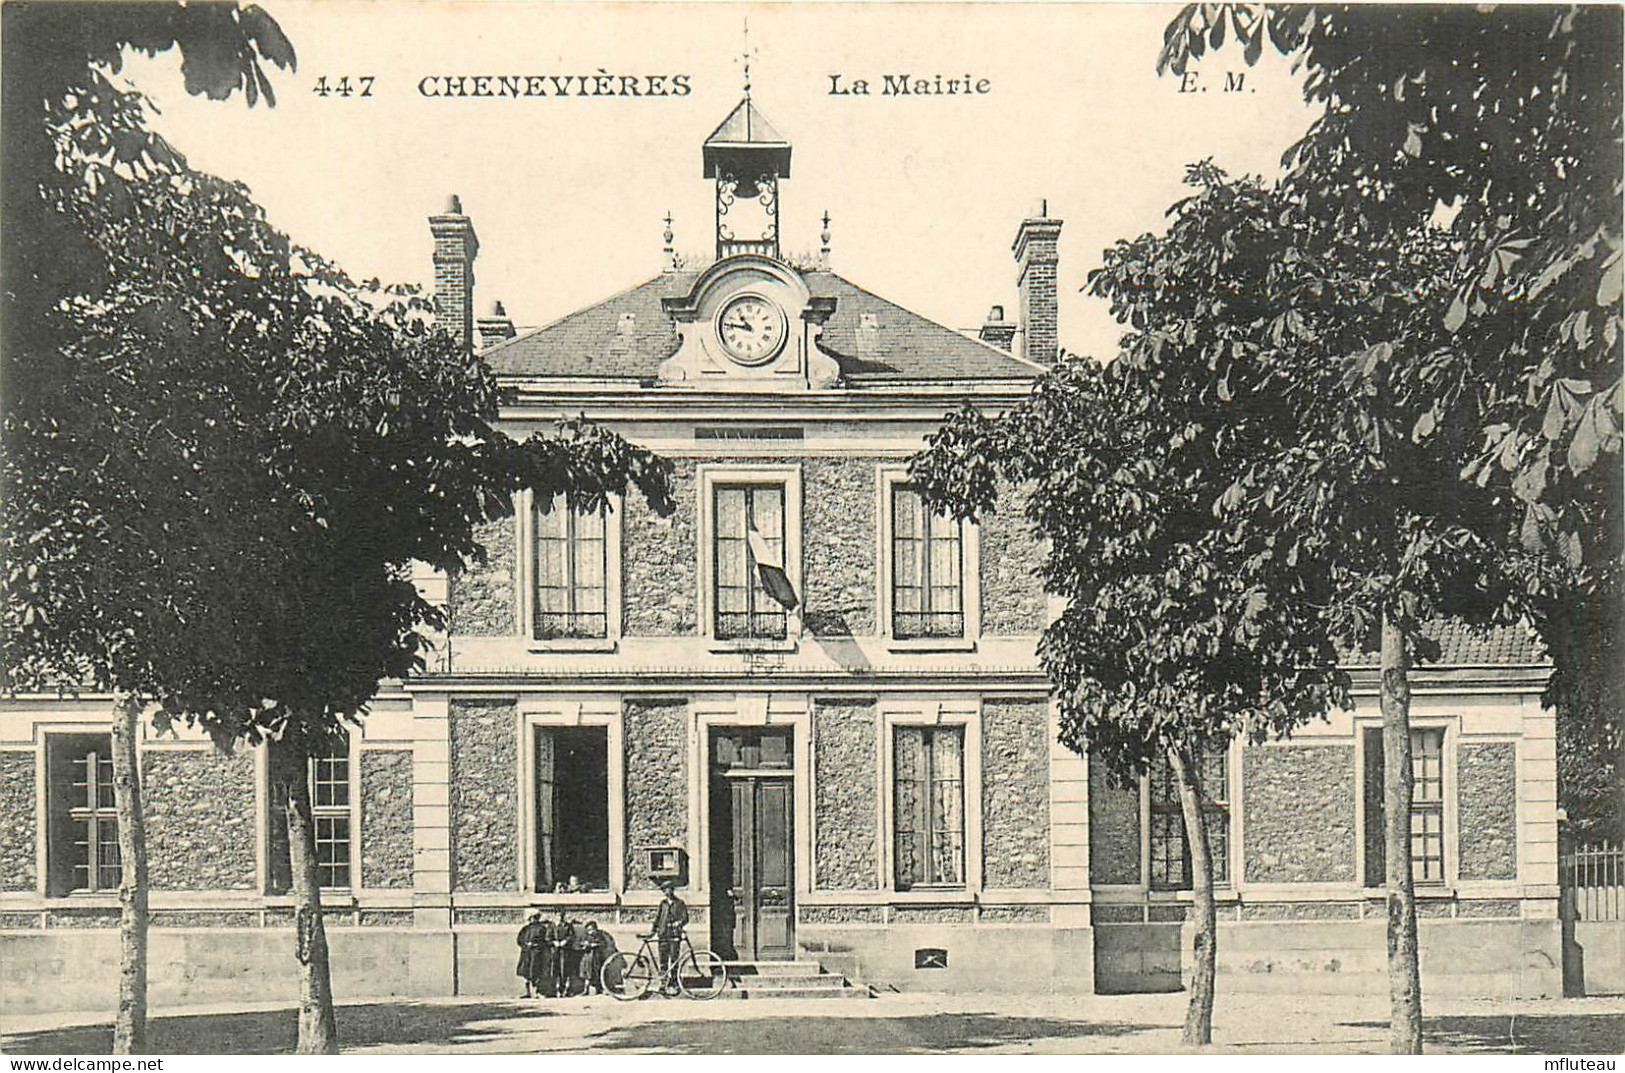 94* CHENNEVIERES  La Mairie   RL13.1344 - Chennevieres Sur Marne